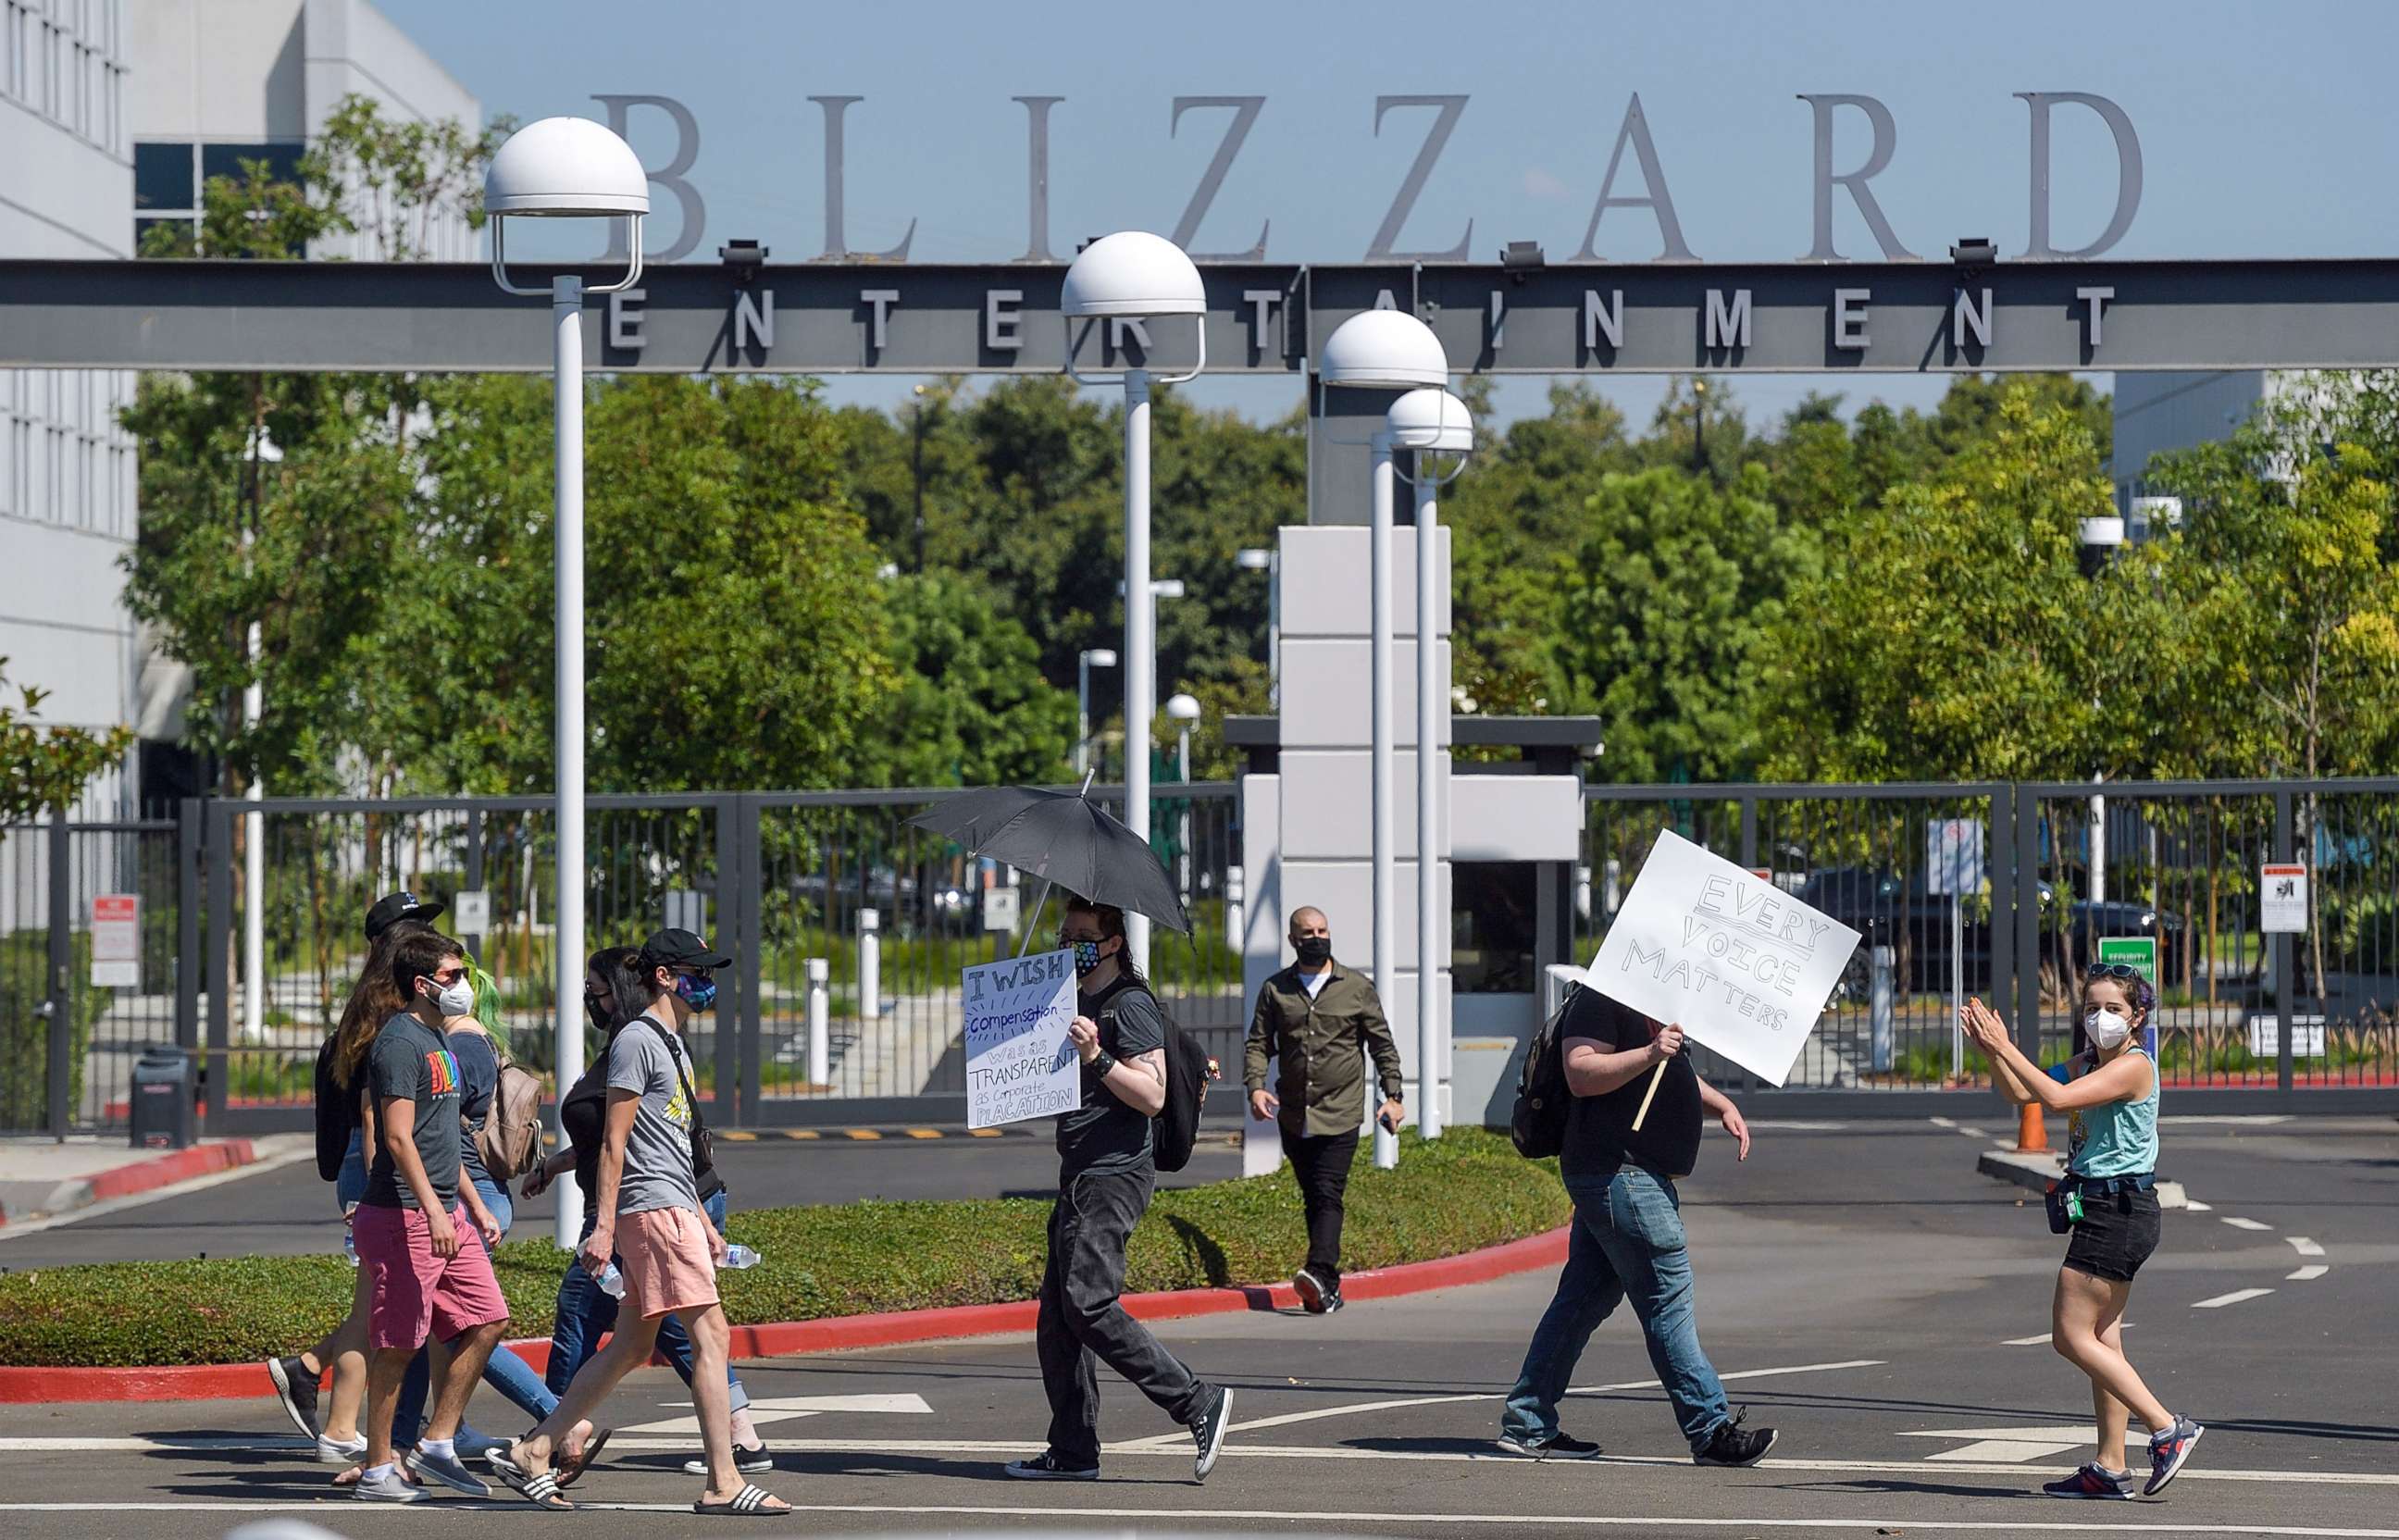 PHOTO: Blizzard Entertainment employees and supporters protest for better working conditions in Irvine, Calif., on July 28, 2021.